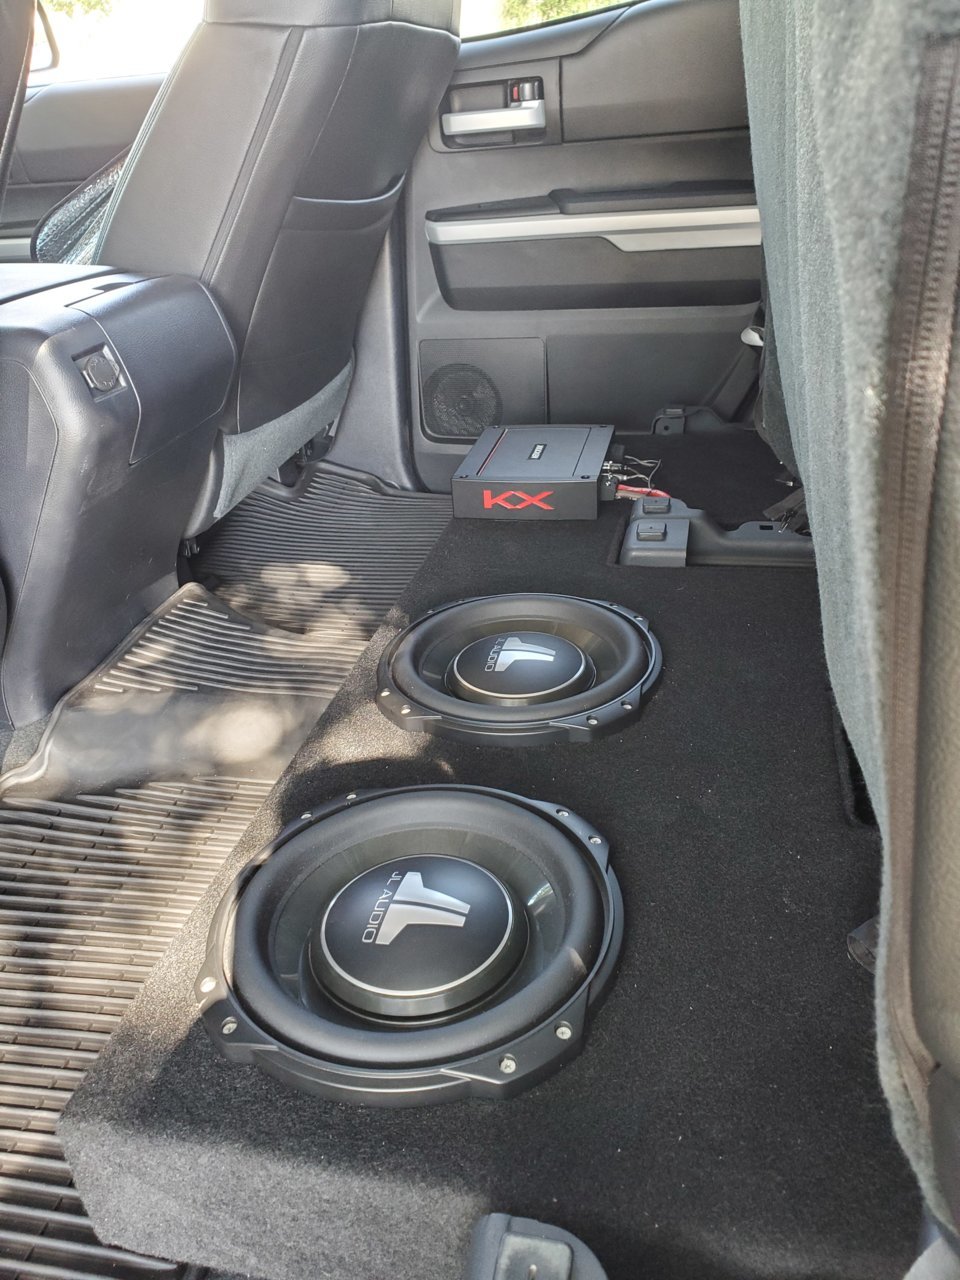 Compatible with Toyota Tundra 07-12 Double Cab Truck Dual 10 Kicker C10 Subwoofer Sub Box Enclosure 600 Watts Peak 